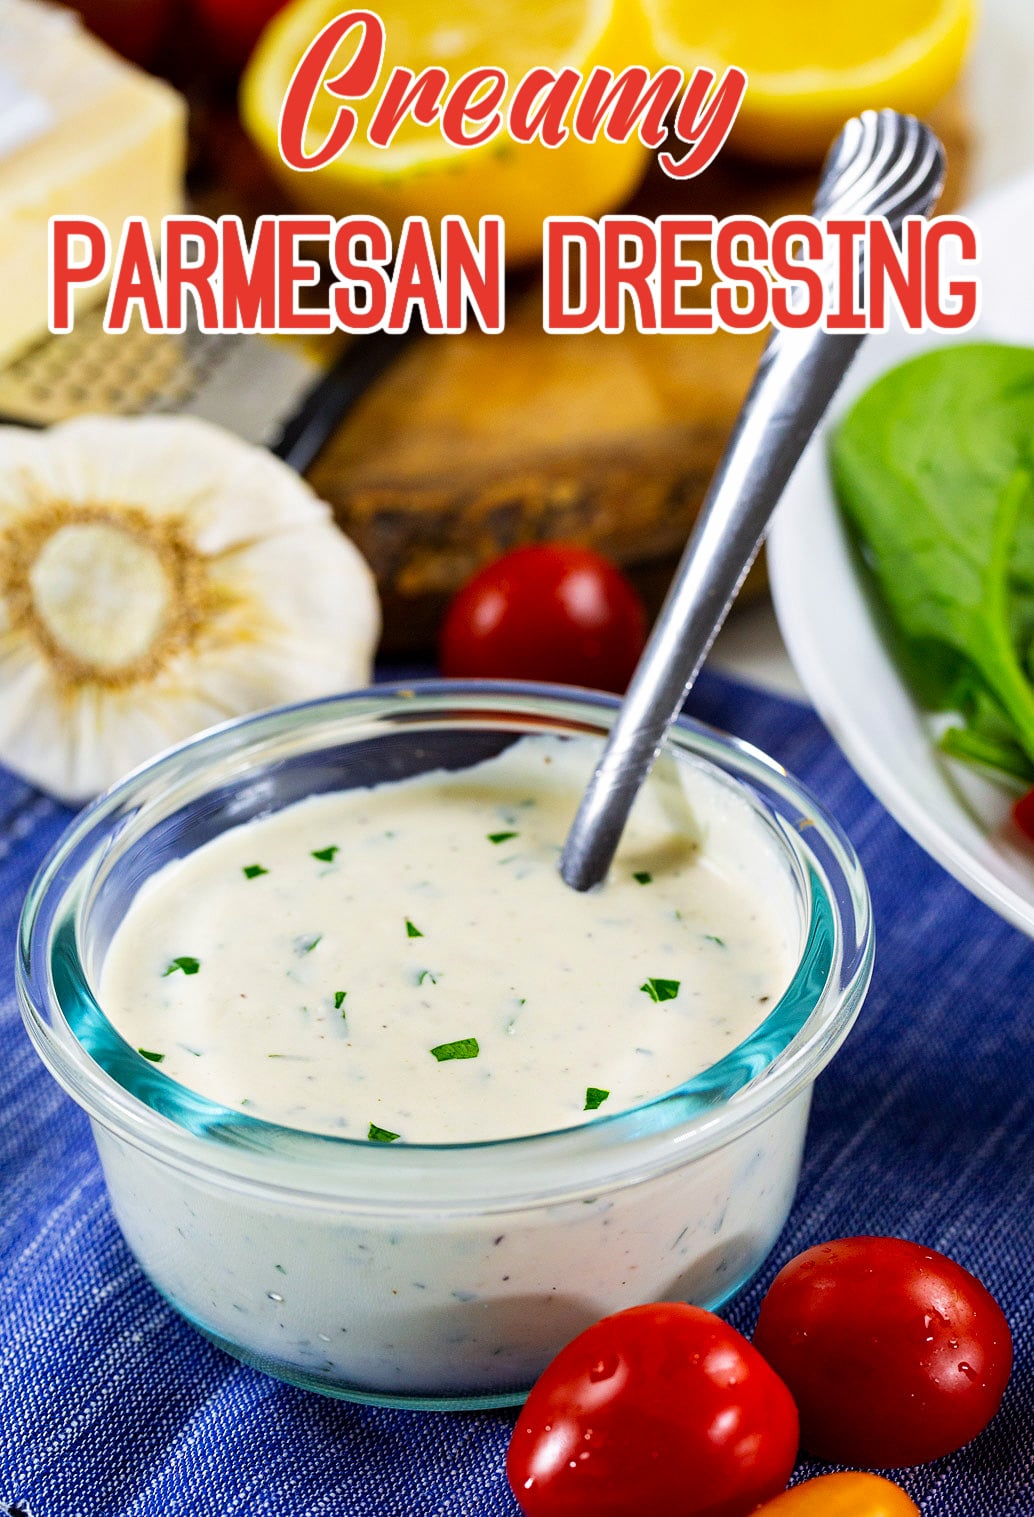 Creamy Parmesan Dressing in glass bowl.